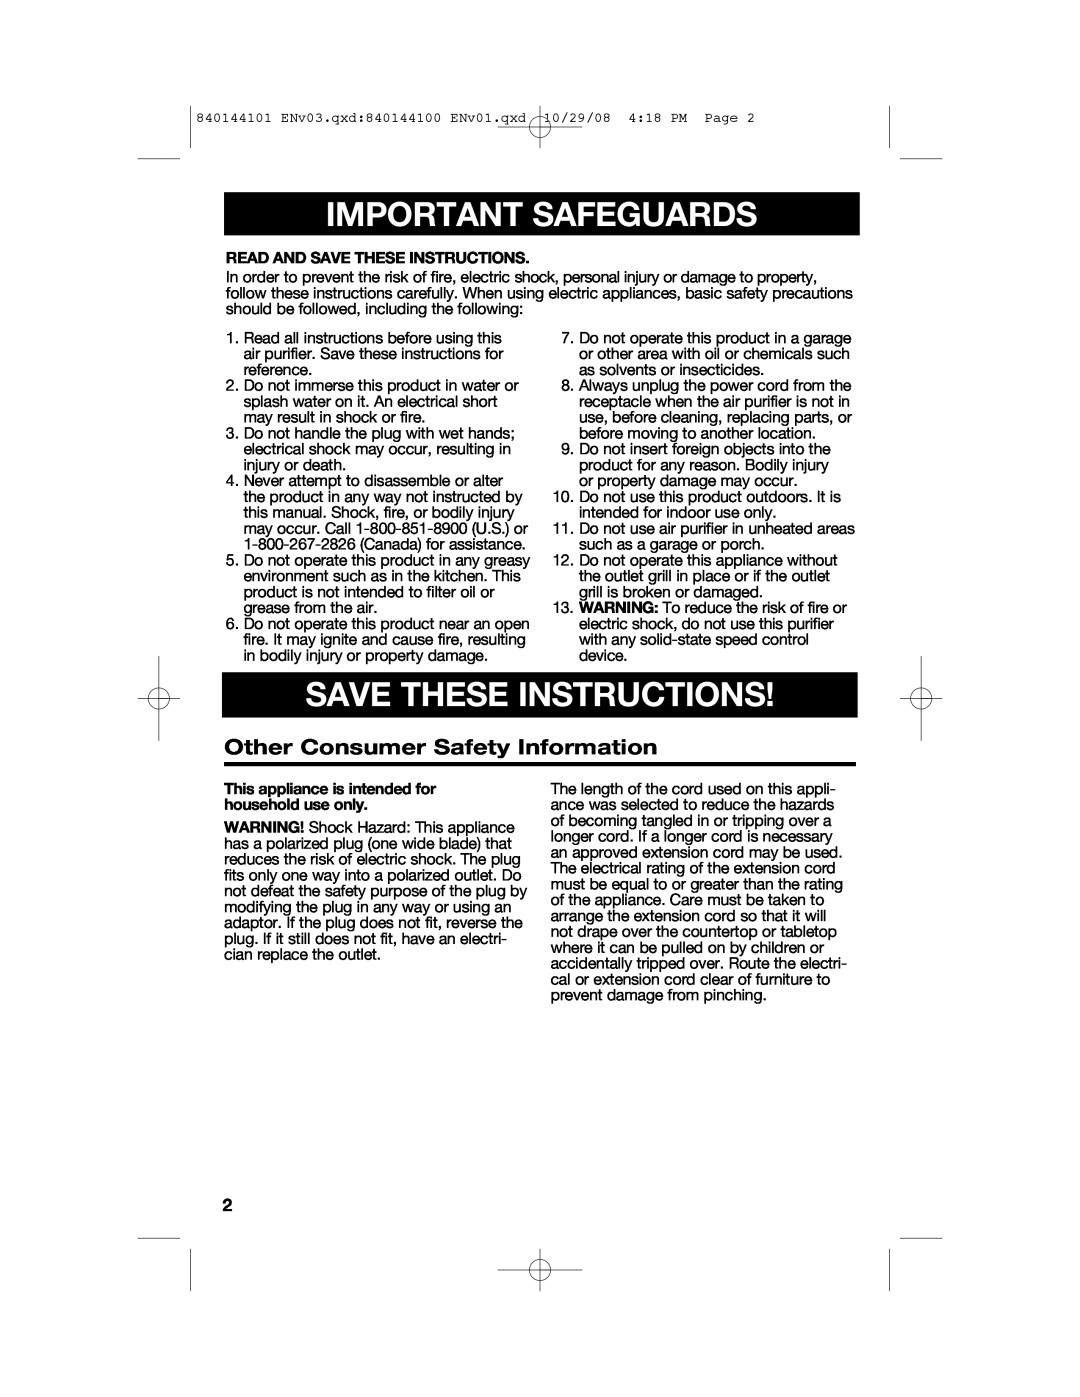 Hamilton Beach 840144101 manual Important Safeguards, Save These Instructions, Other Consumer Safety Information 